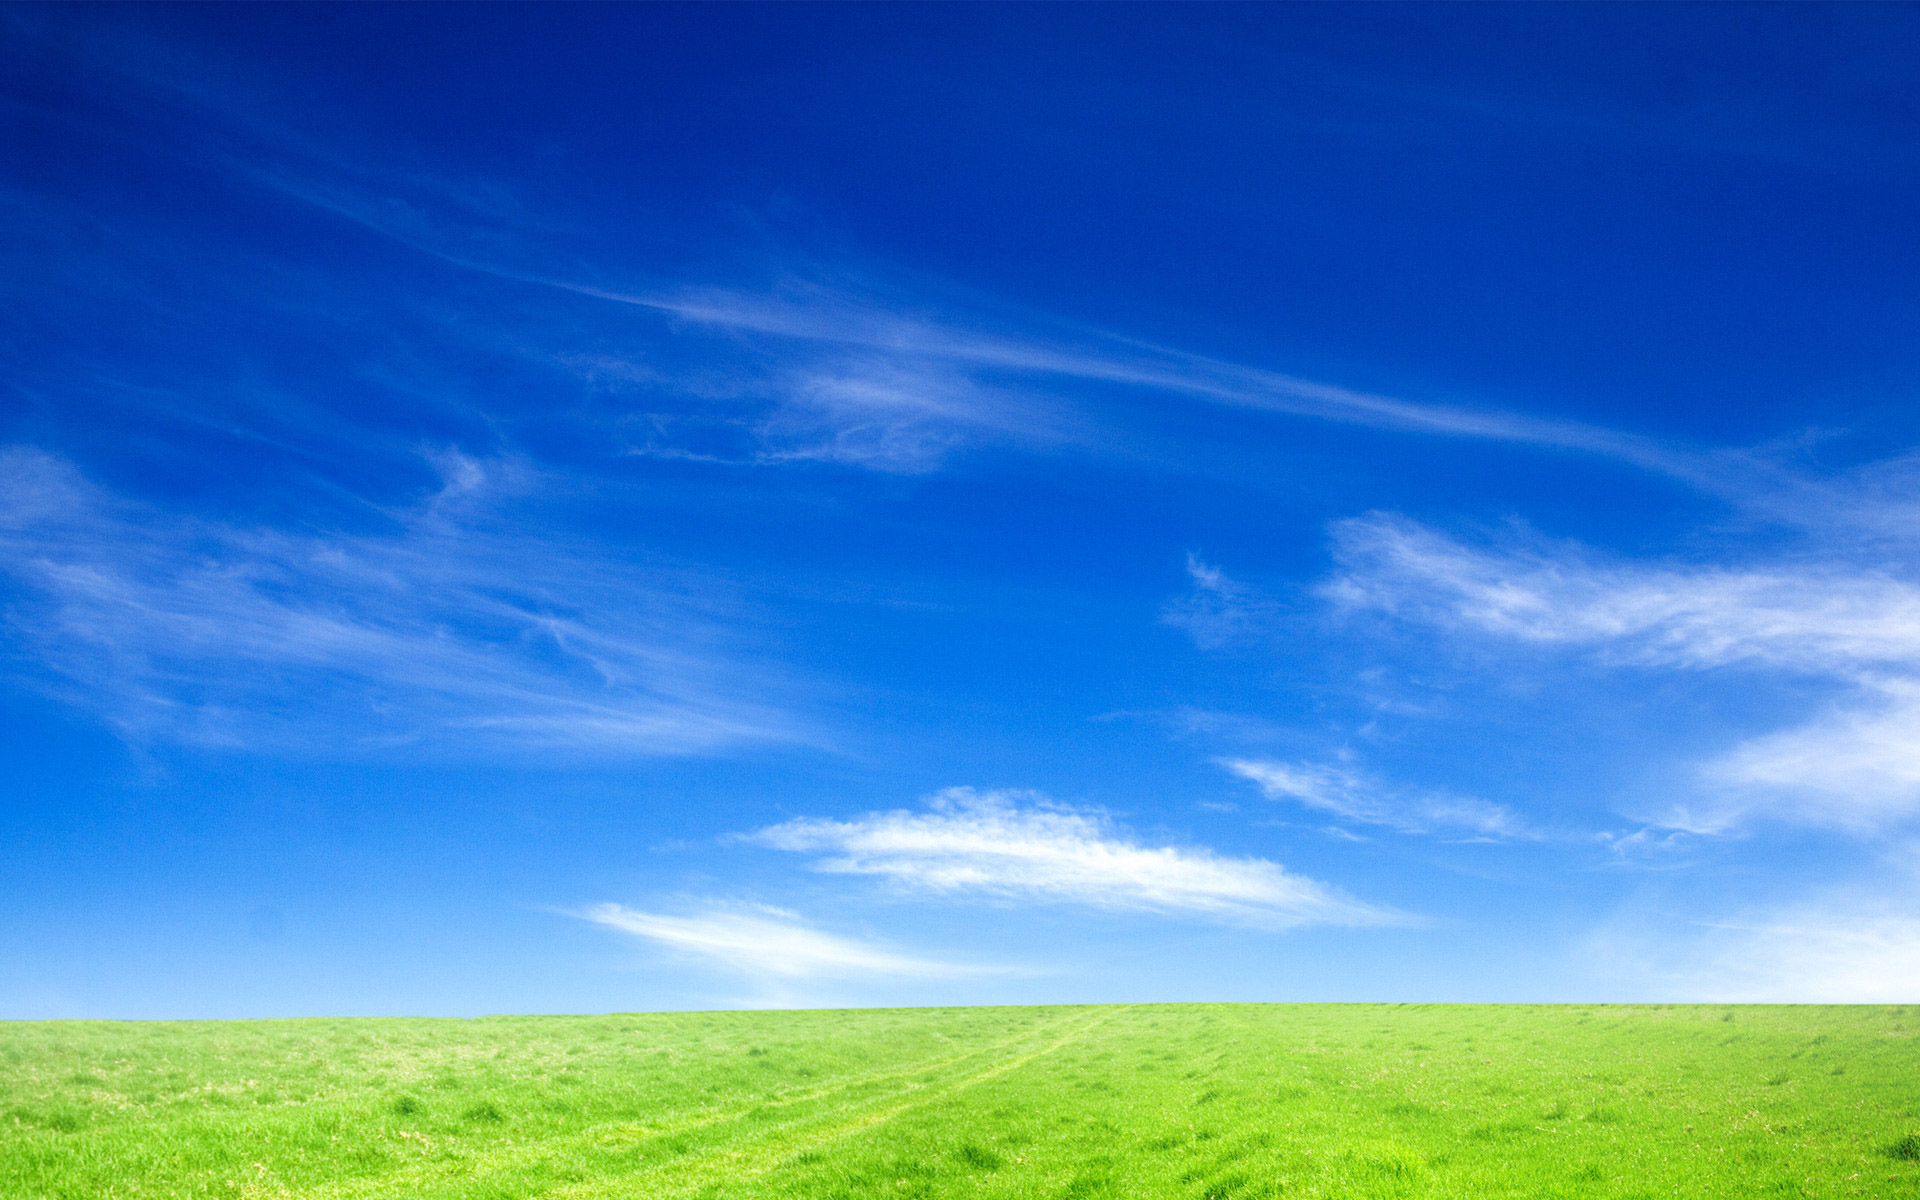 Blue Sky And Green Grass Hd Backgrounds For Powerpoint Templates Ppt Backgrounds